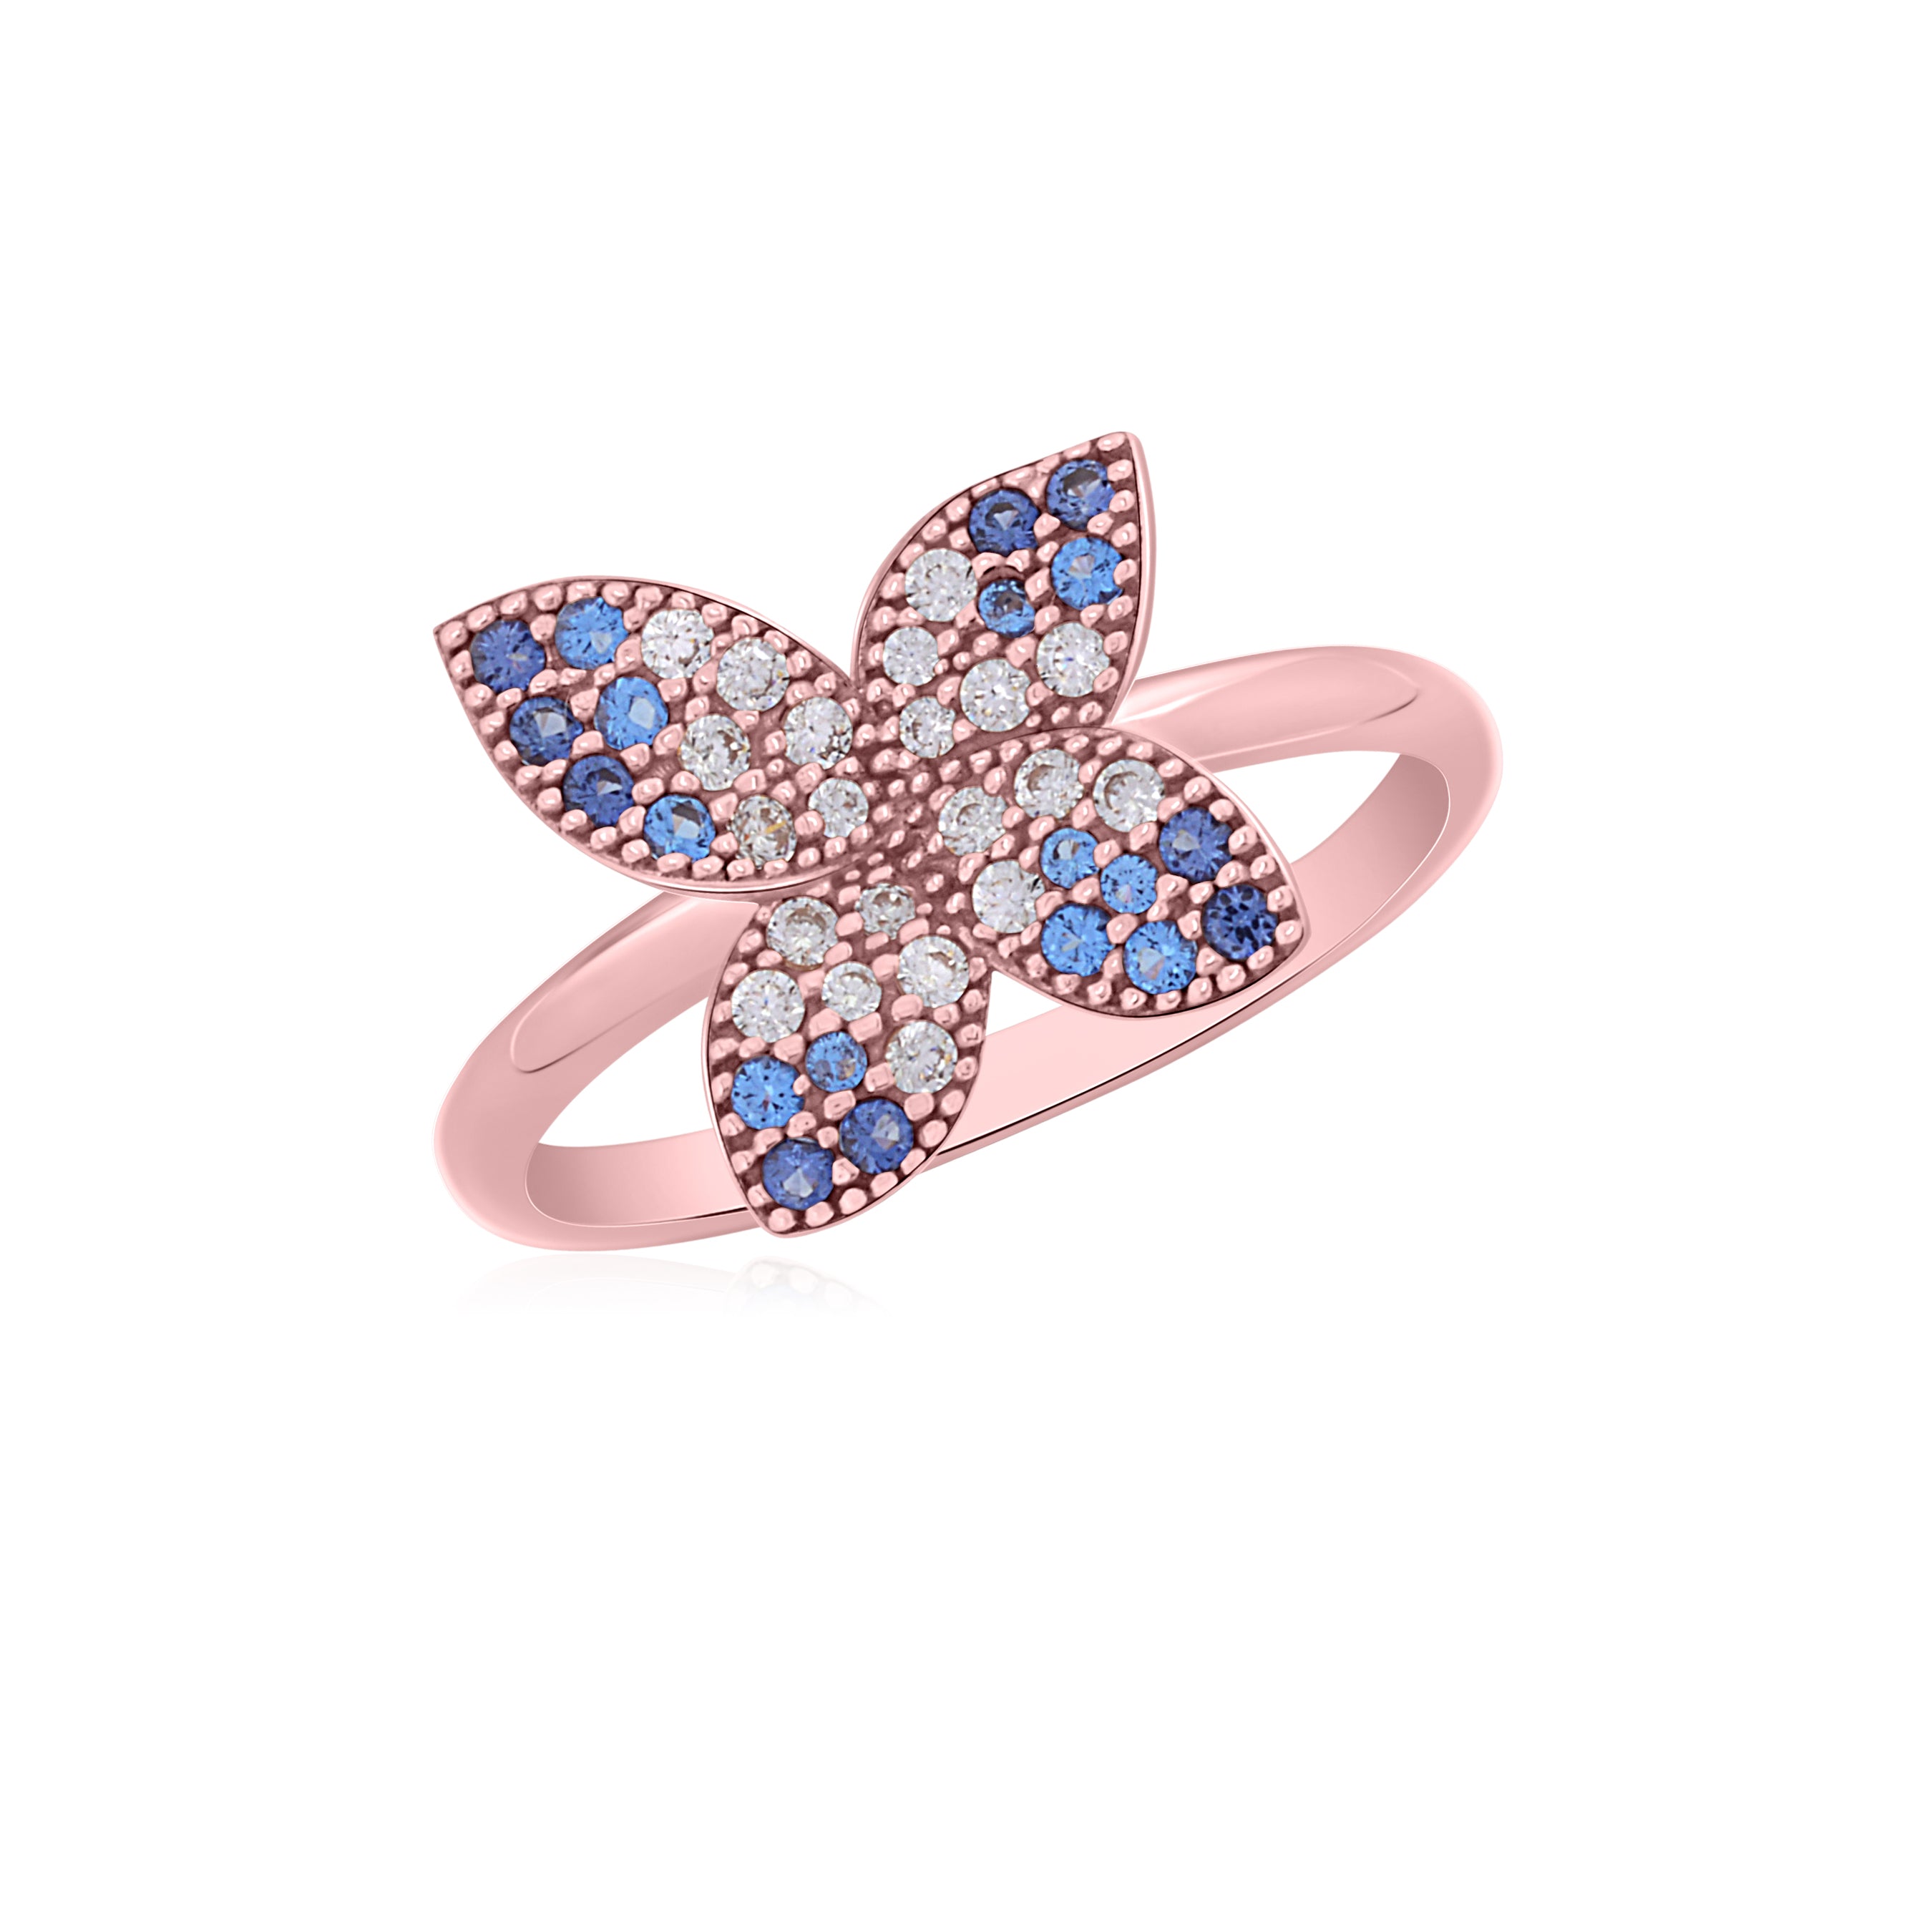 UNICORNJ 14K Rose Gold Four Petal Flower Ring Red or BluePave CZ Italy